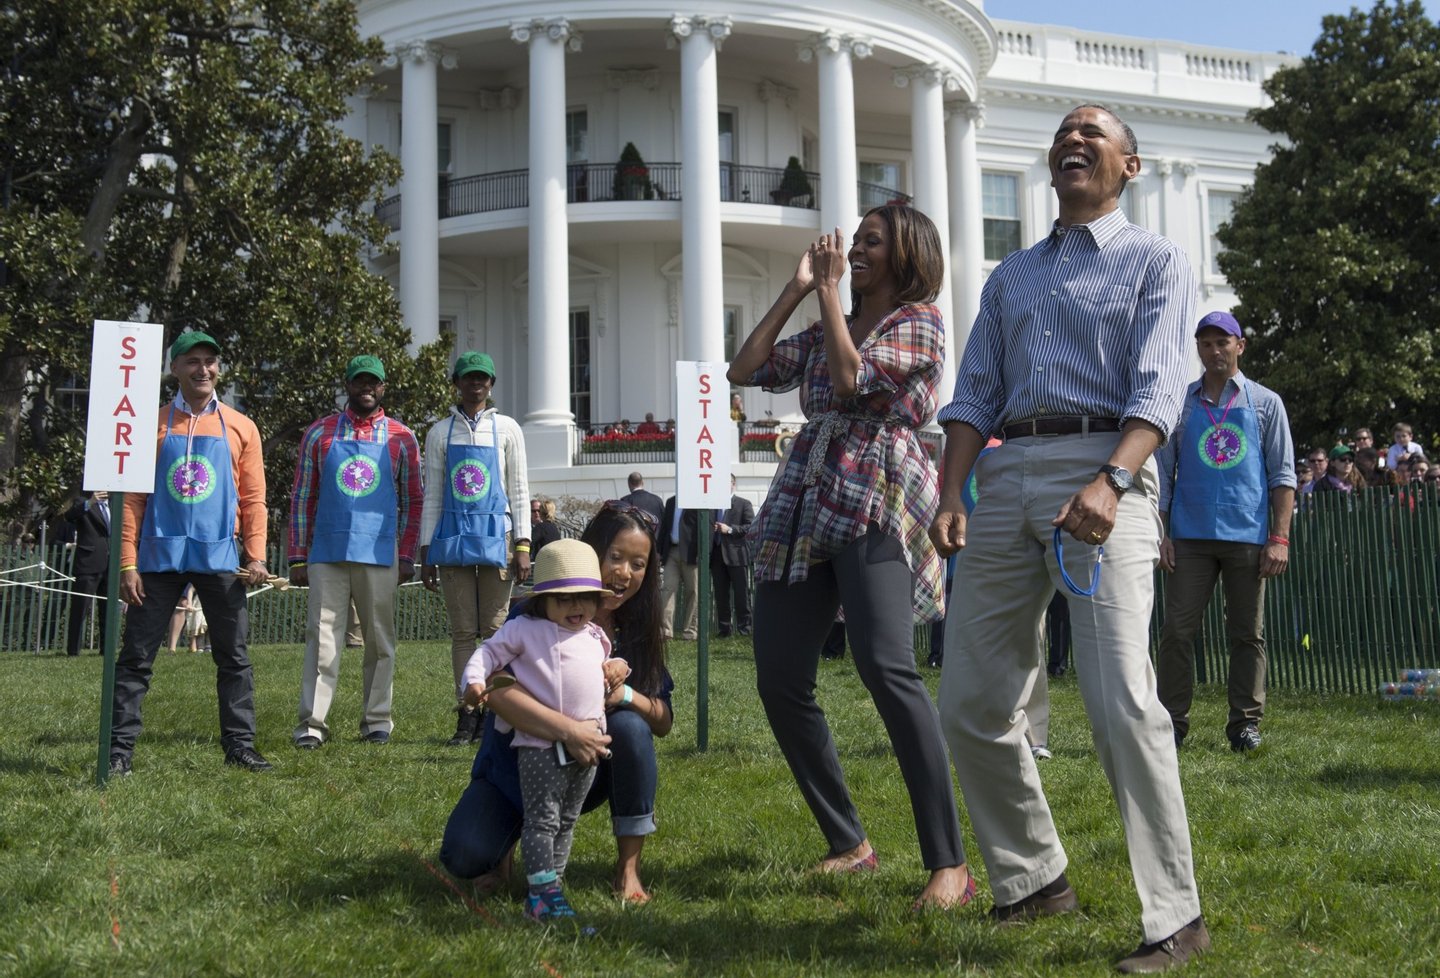 US President Barack Obama and First Lady Michelle Obama react to a child rolling an Easter egg during the annual White House Easter Egg Roll on the South Lawn of the White House in Washington, DC, April 21, 2014. The 126th annual White House Easter Egg Roll, the largest annual public event at the White House with more than 30,000 attendees expected, features live music, sports courts, cooking stations, storytelling and Easter egg rolling, with the theme, "Hop into Healthy, Swing into Shape." AFP PHOTO / Saul LOEB (Photo credit should read SAUL LOEB/AFP/Getty Images)